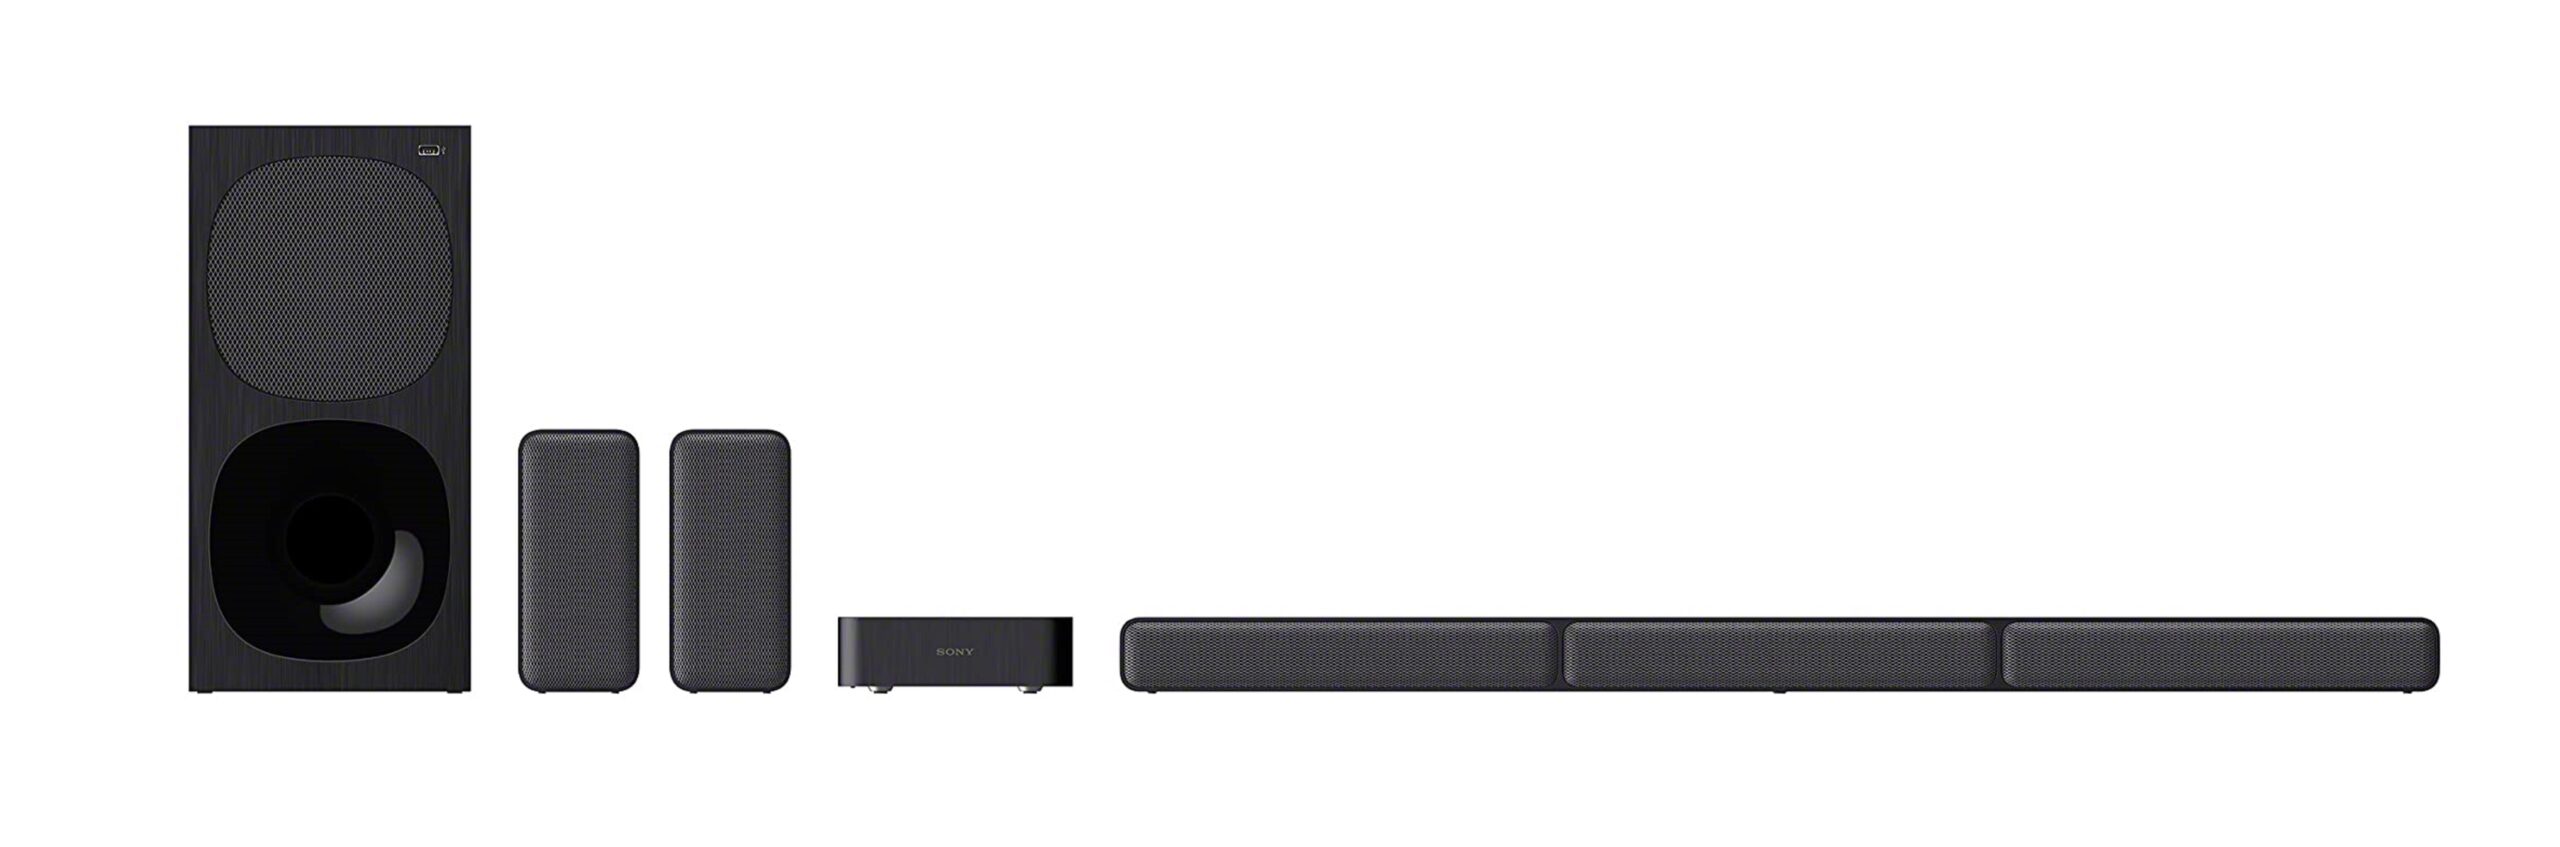 Upgrade Your Home Entertainment with Affordable Cinematic-Style Soundbars from Sony